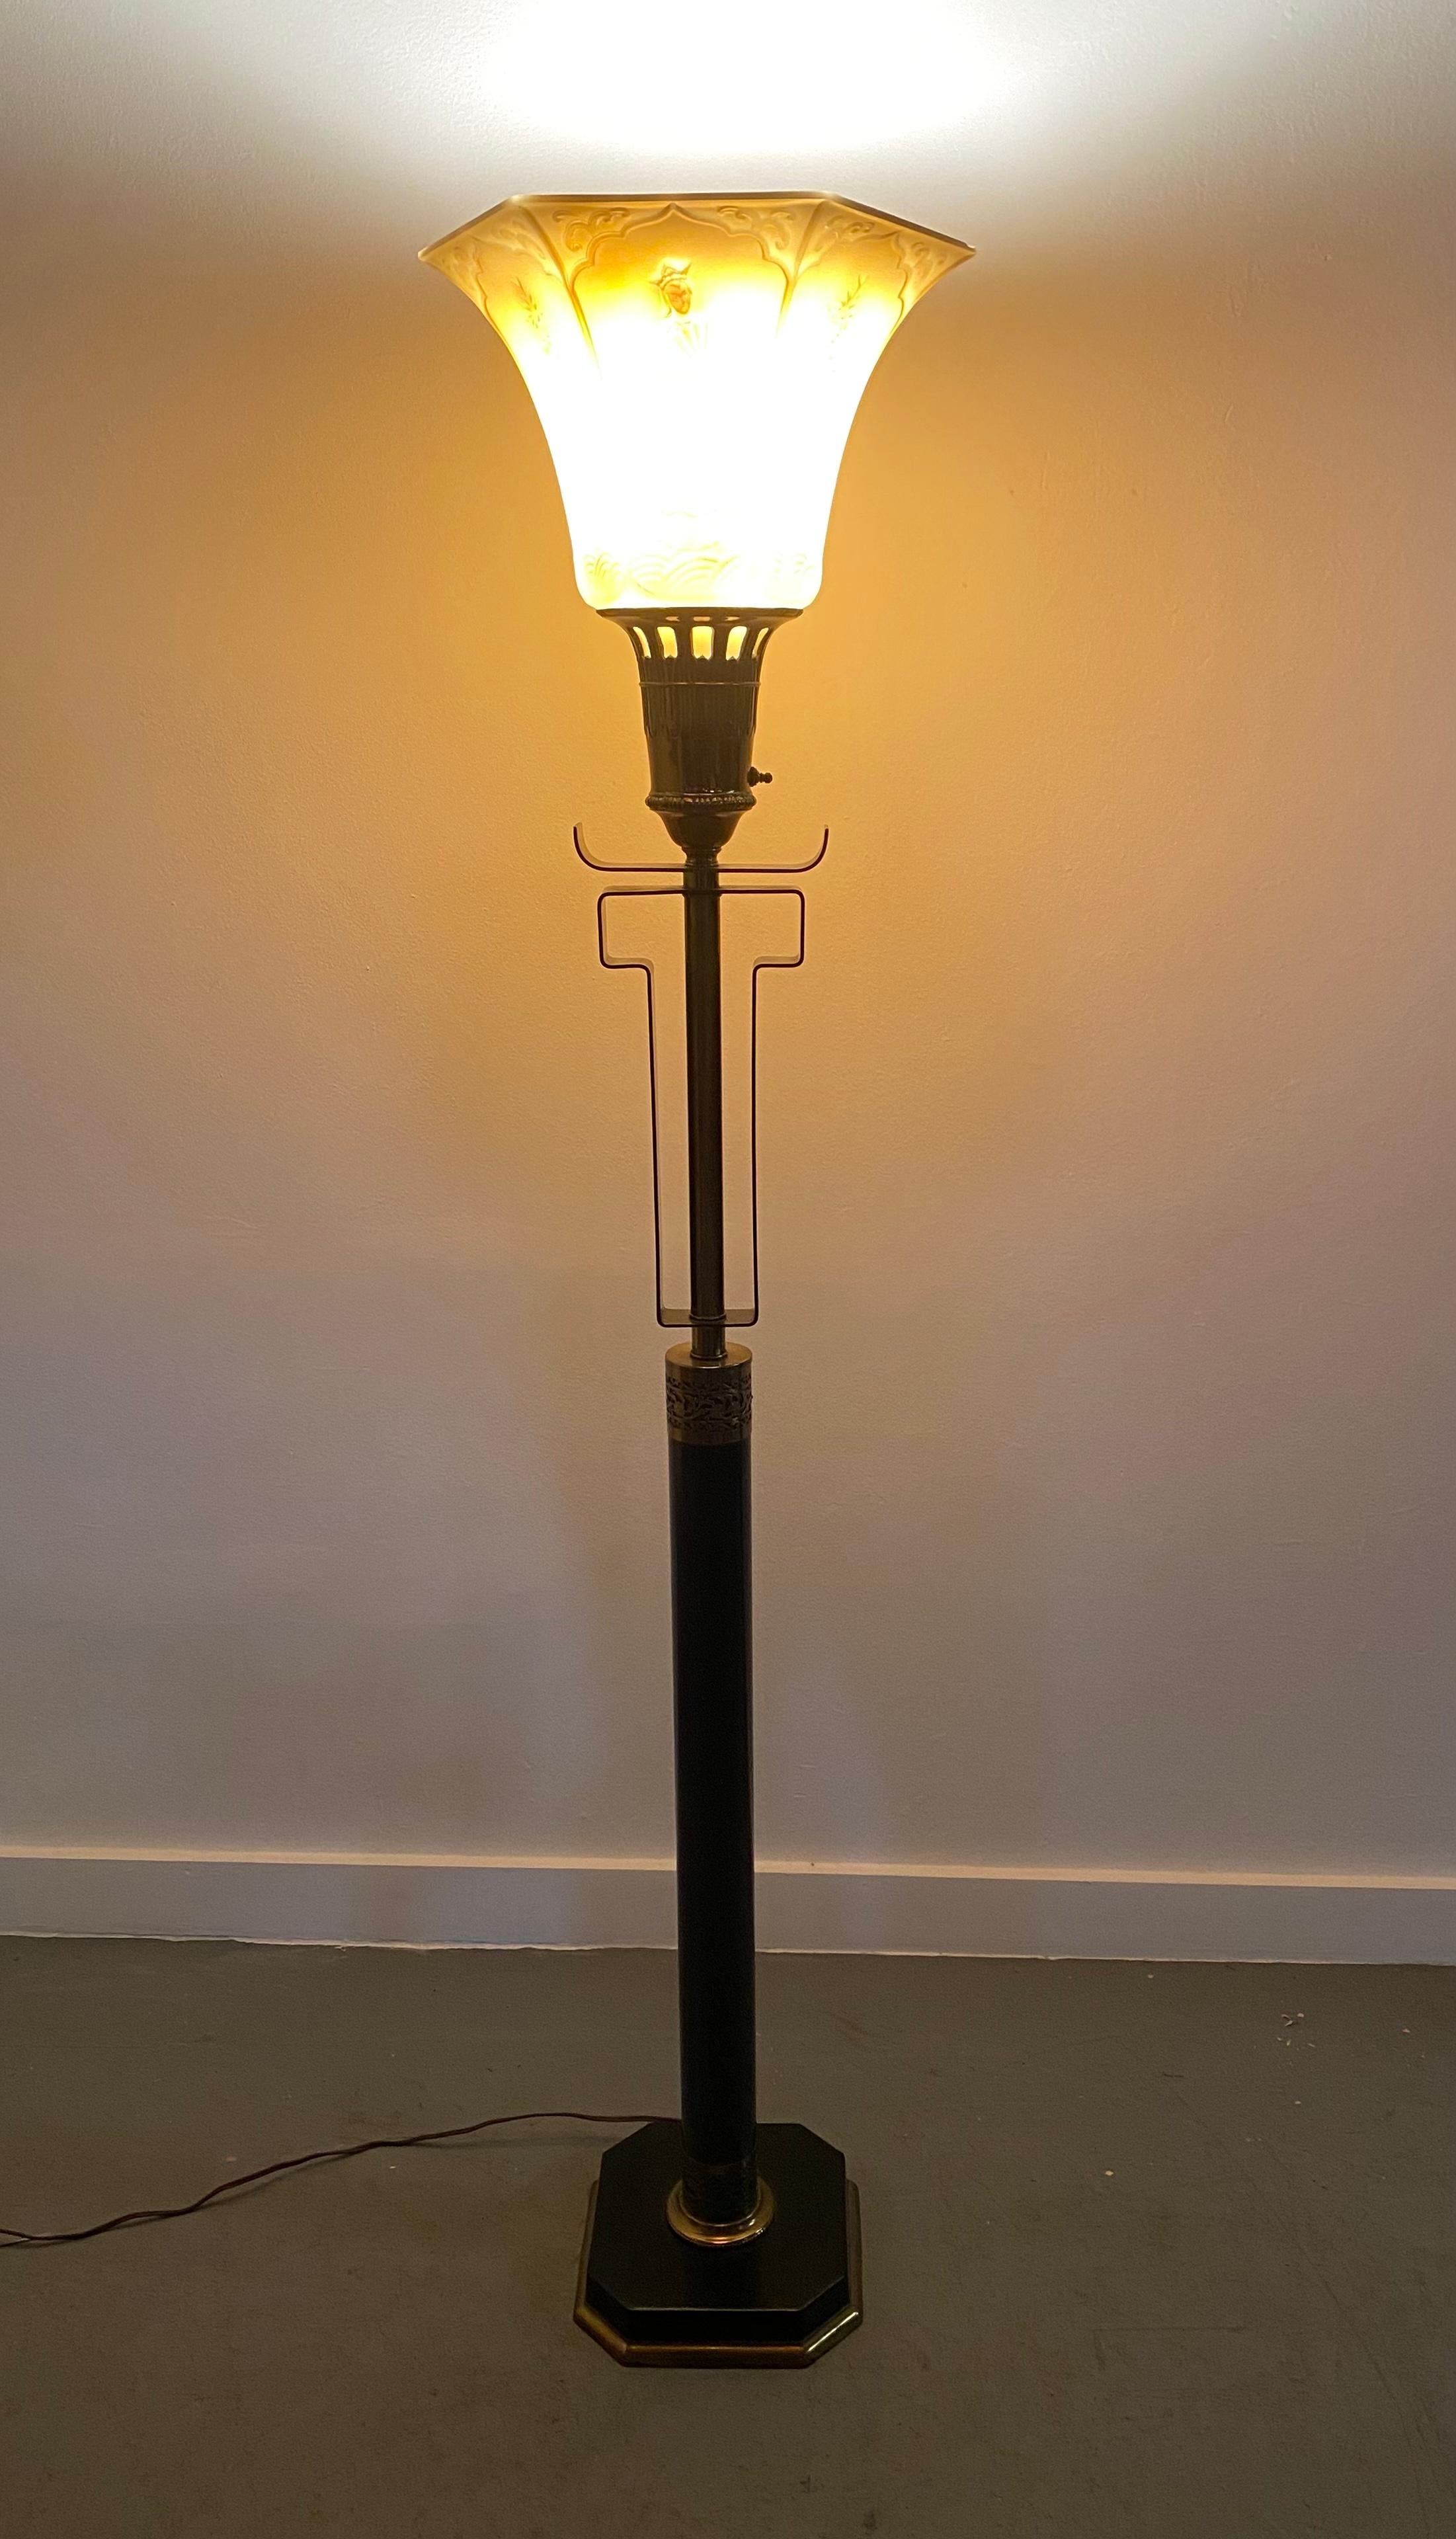 Lacquered Asian Modernist Torchere / Floor Lamp, Attributed to James Mont, 1940s For Sale